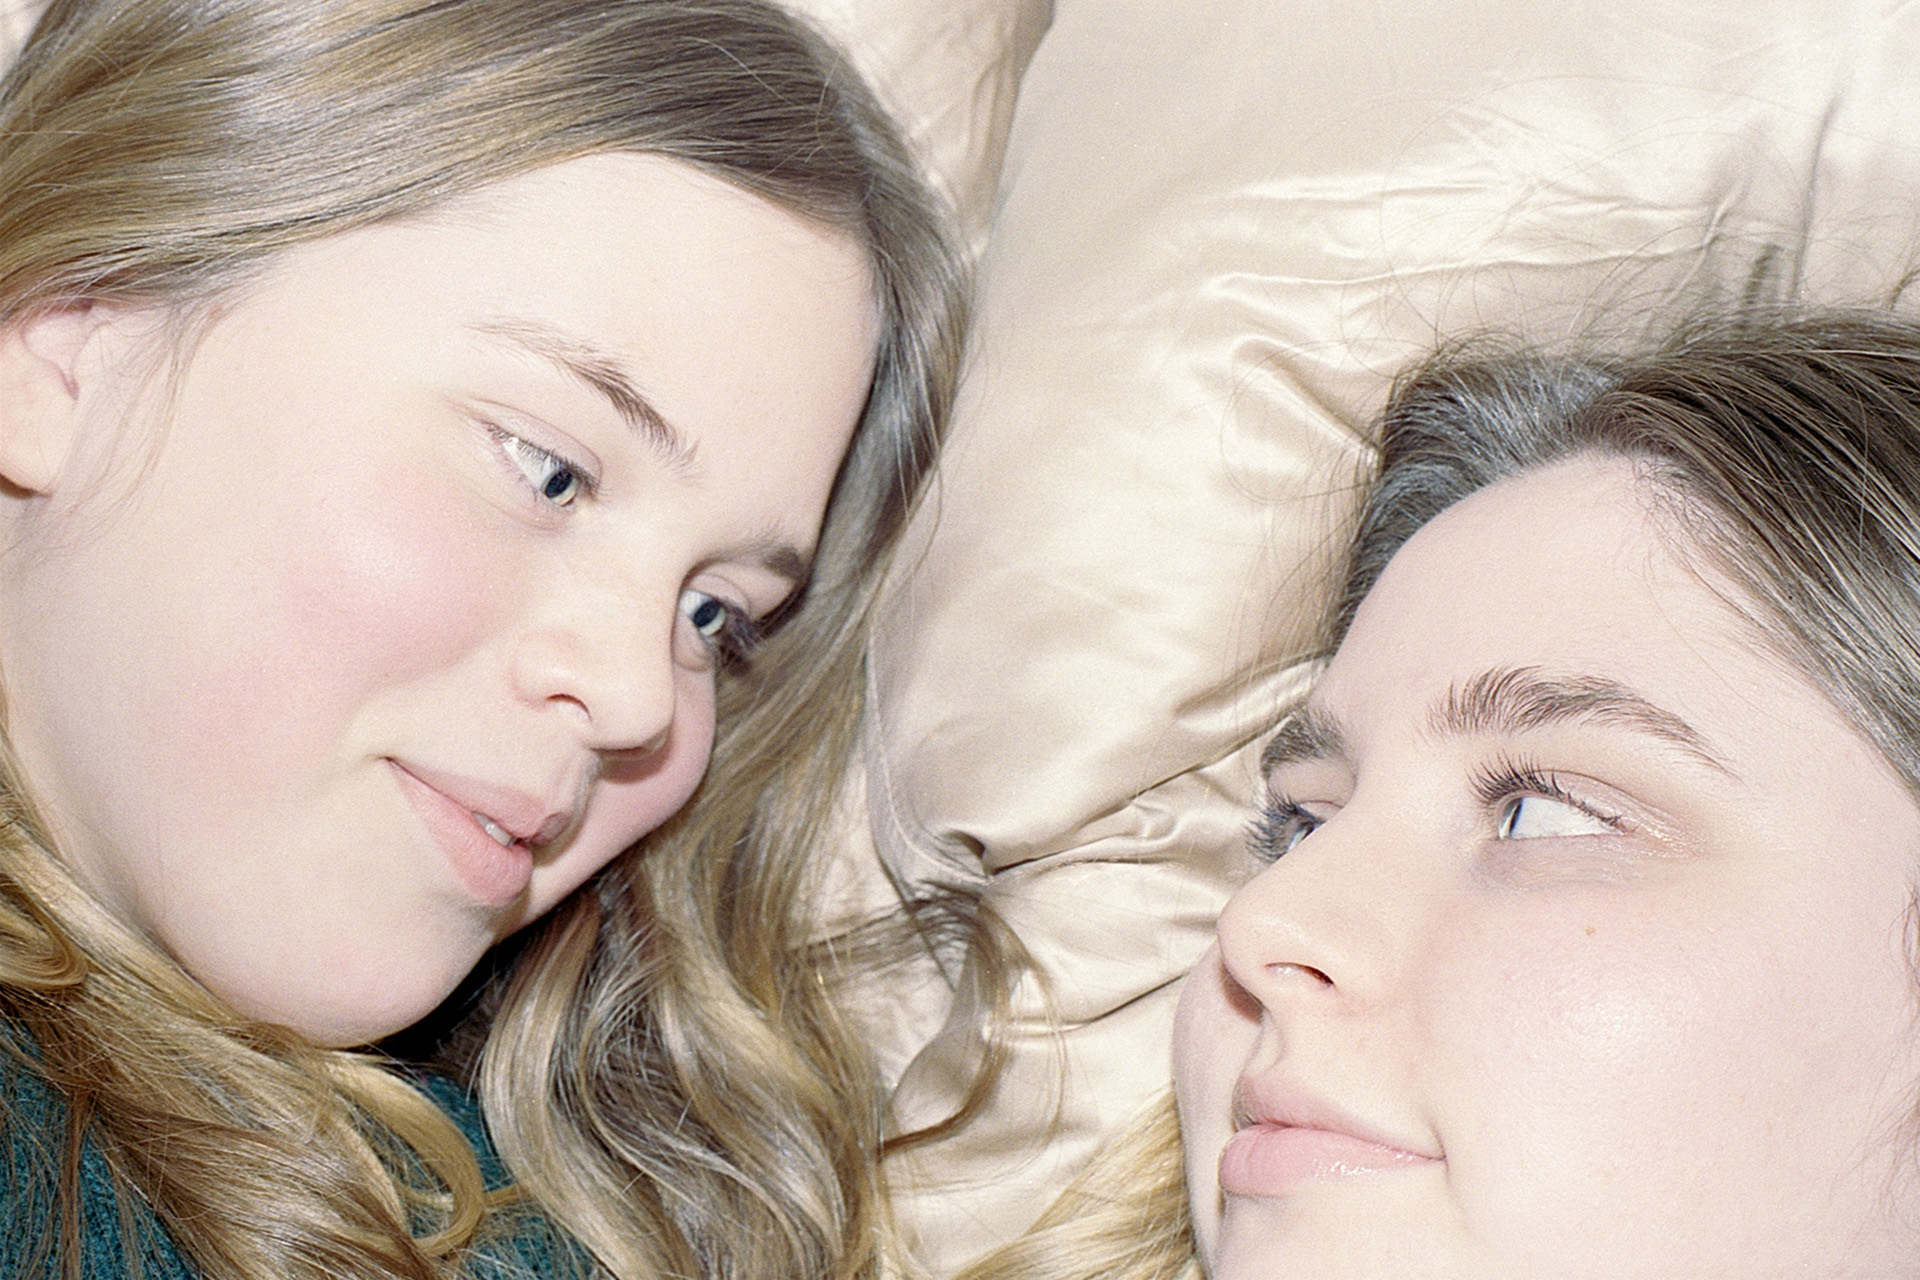 Mariah and Eden lay next to each other against a light pink silk pillowcase. They share direct eye contact while small smirks play on both of their mouths.